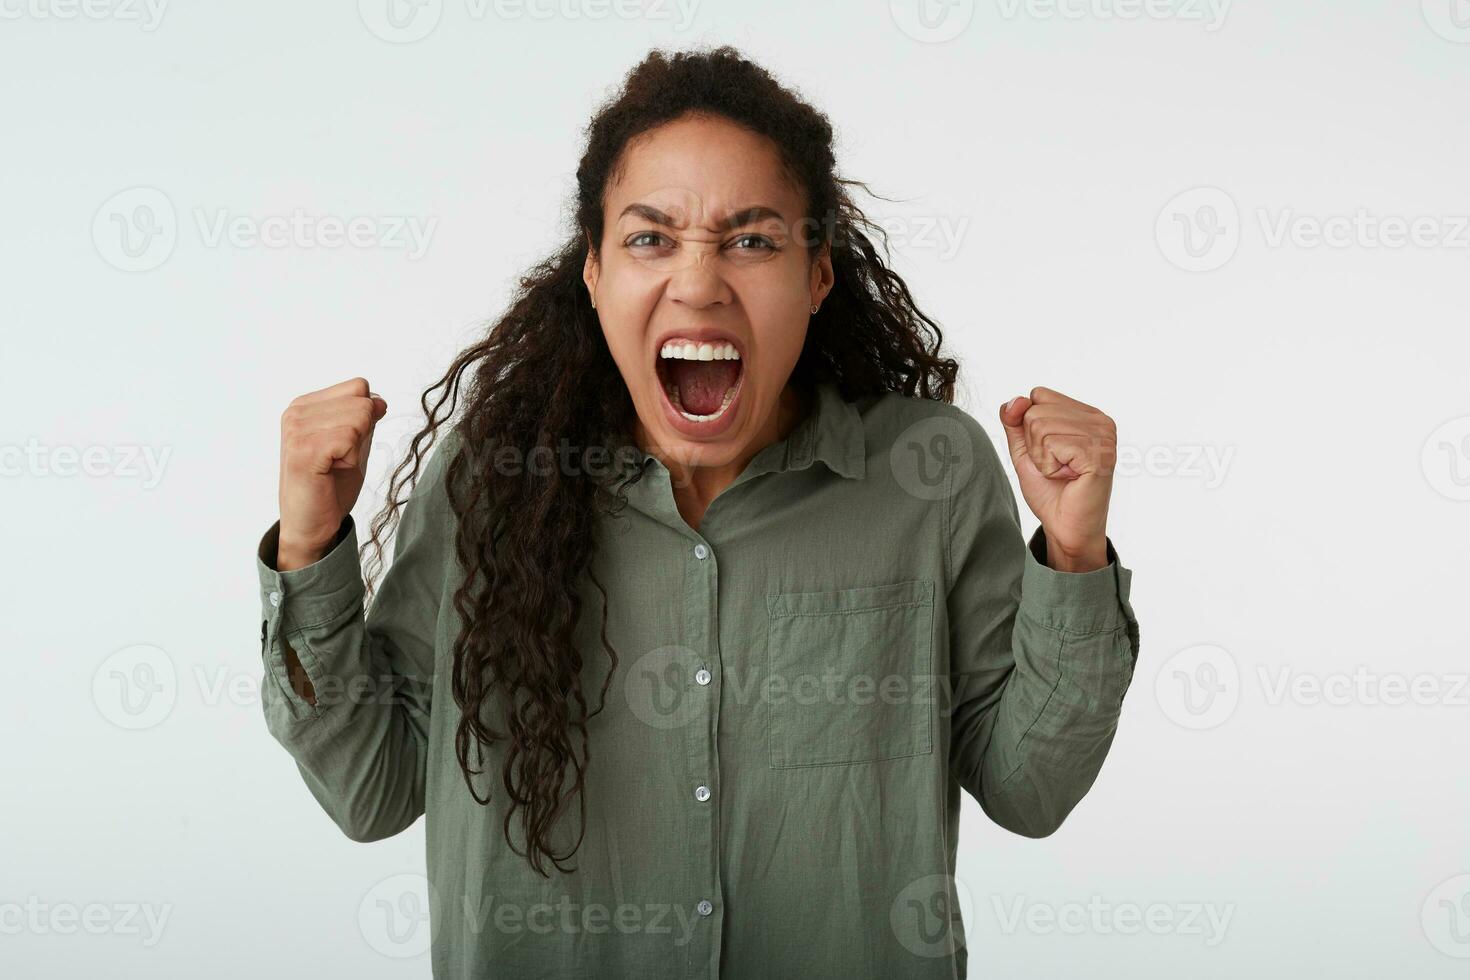 Studio photo of mad long haired curly dark skinned female raising excitedly fists while screaming angrily, dressed in green shirt while posing over white background